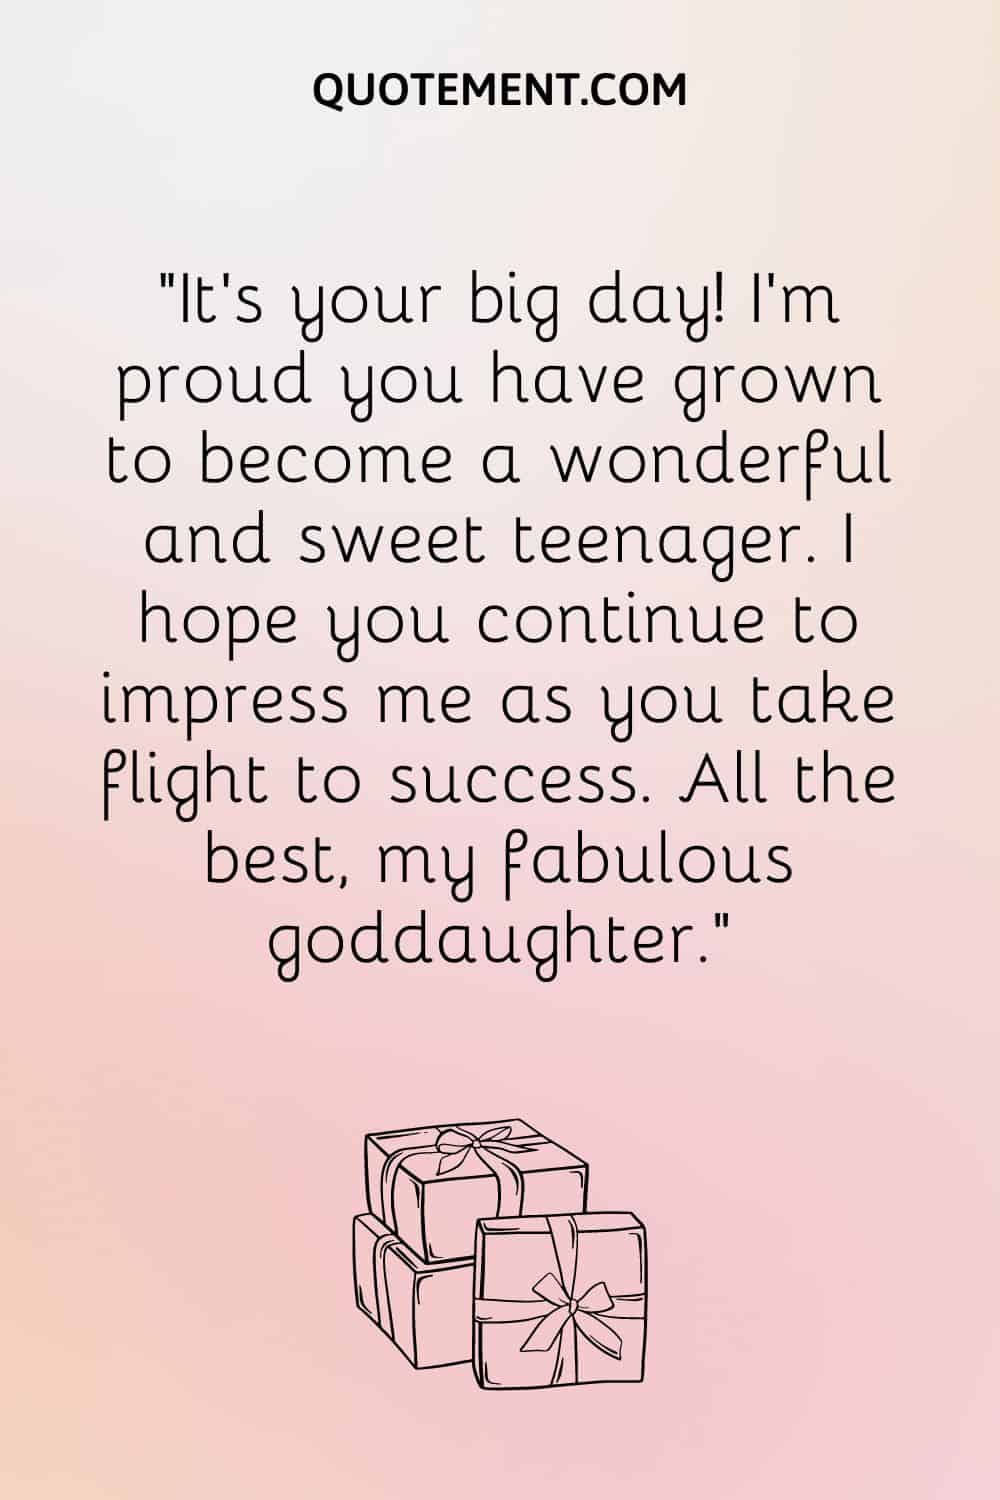 “It’s your big day! I’m proud you have grown to become a wonderful and sweet teenager. I hope you continue to impress me as you take flight to success. All the best, my fabulous goddaughter.”